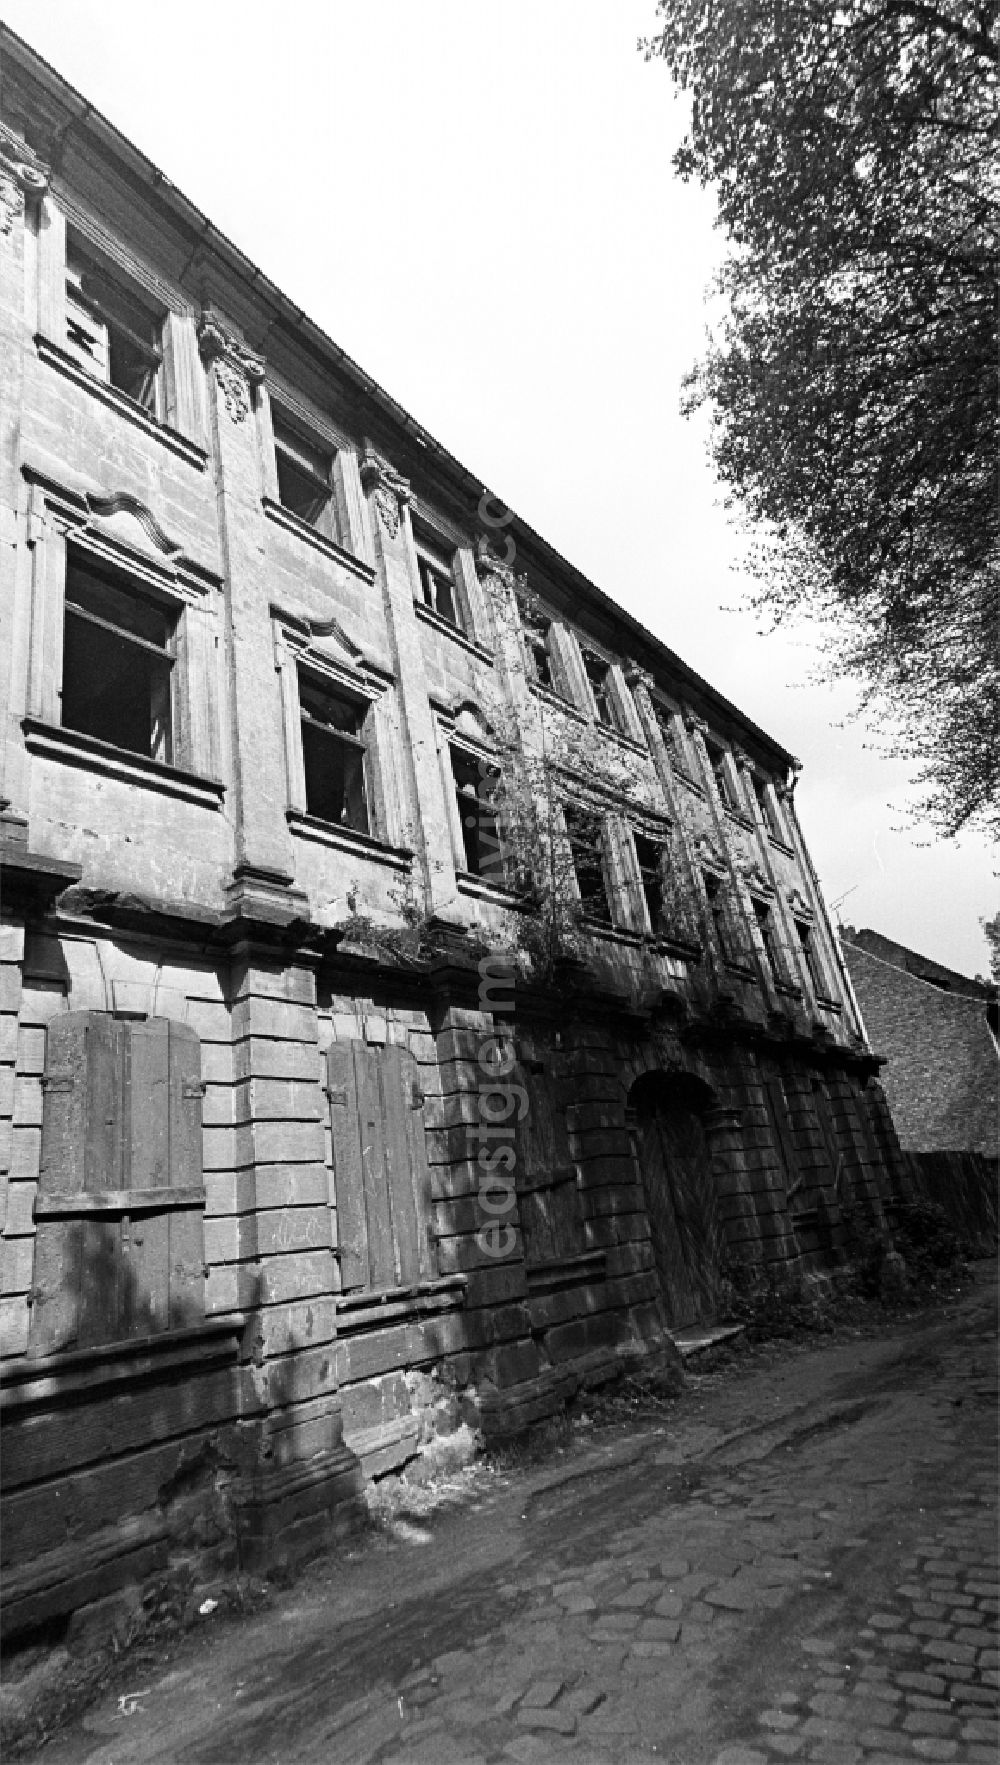 Halberstadt: Ruins of the rest of the facade and roof construction of an apartment building am Duesterngraben in Halberstadt in the state Saxony-Anhalt on the territory of the former GDR, German Democratic Republic